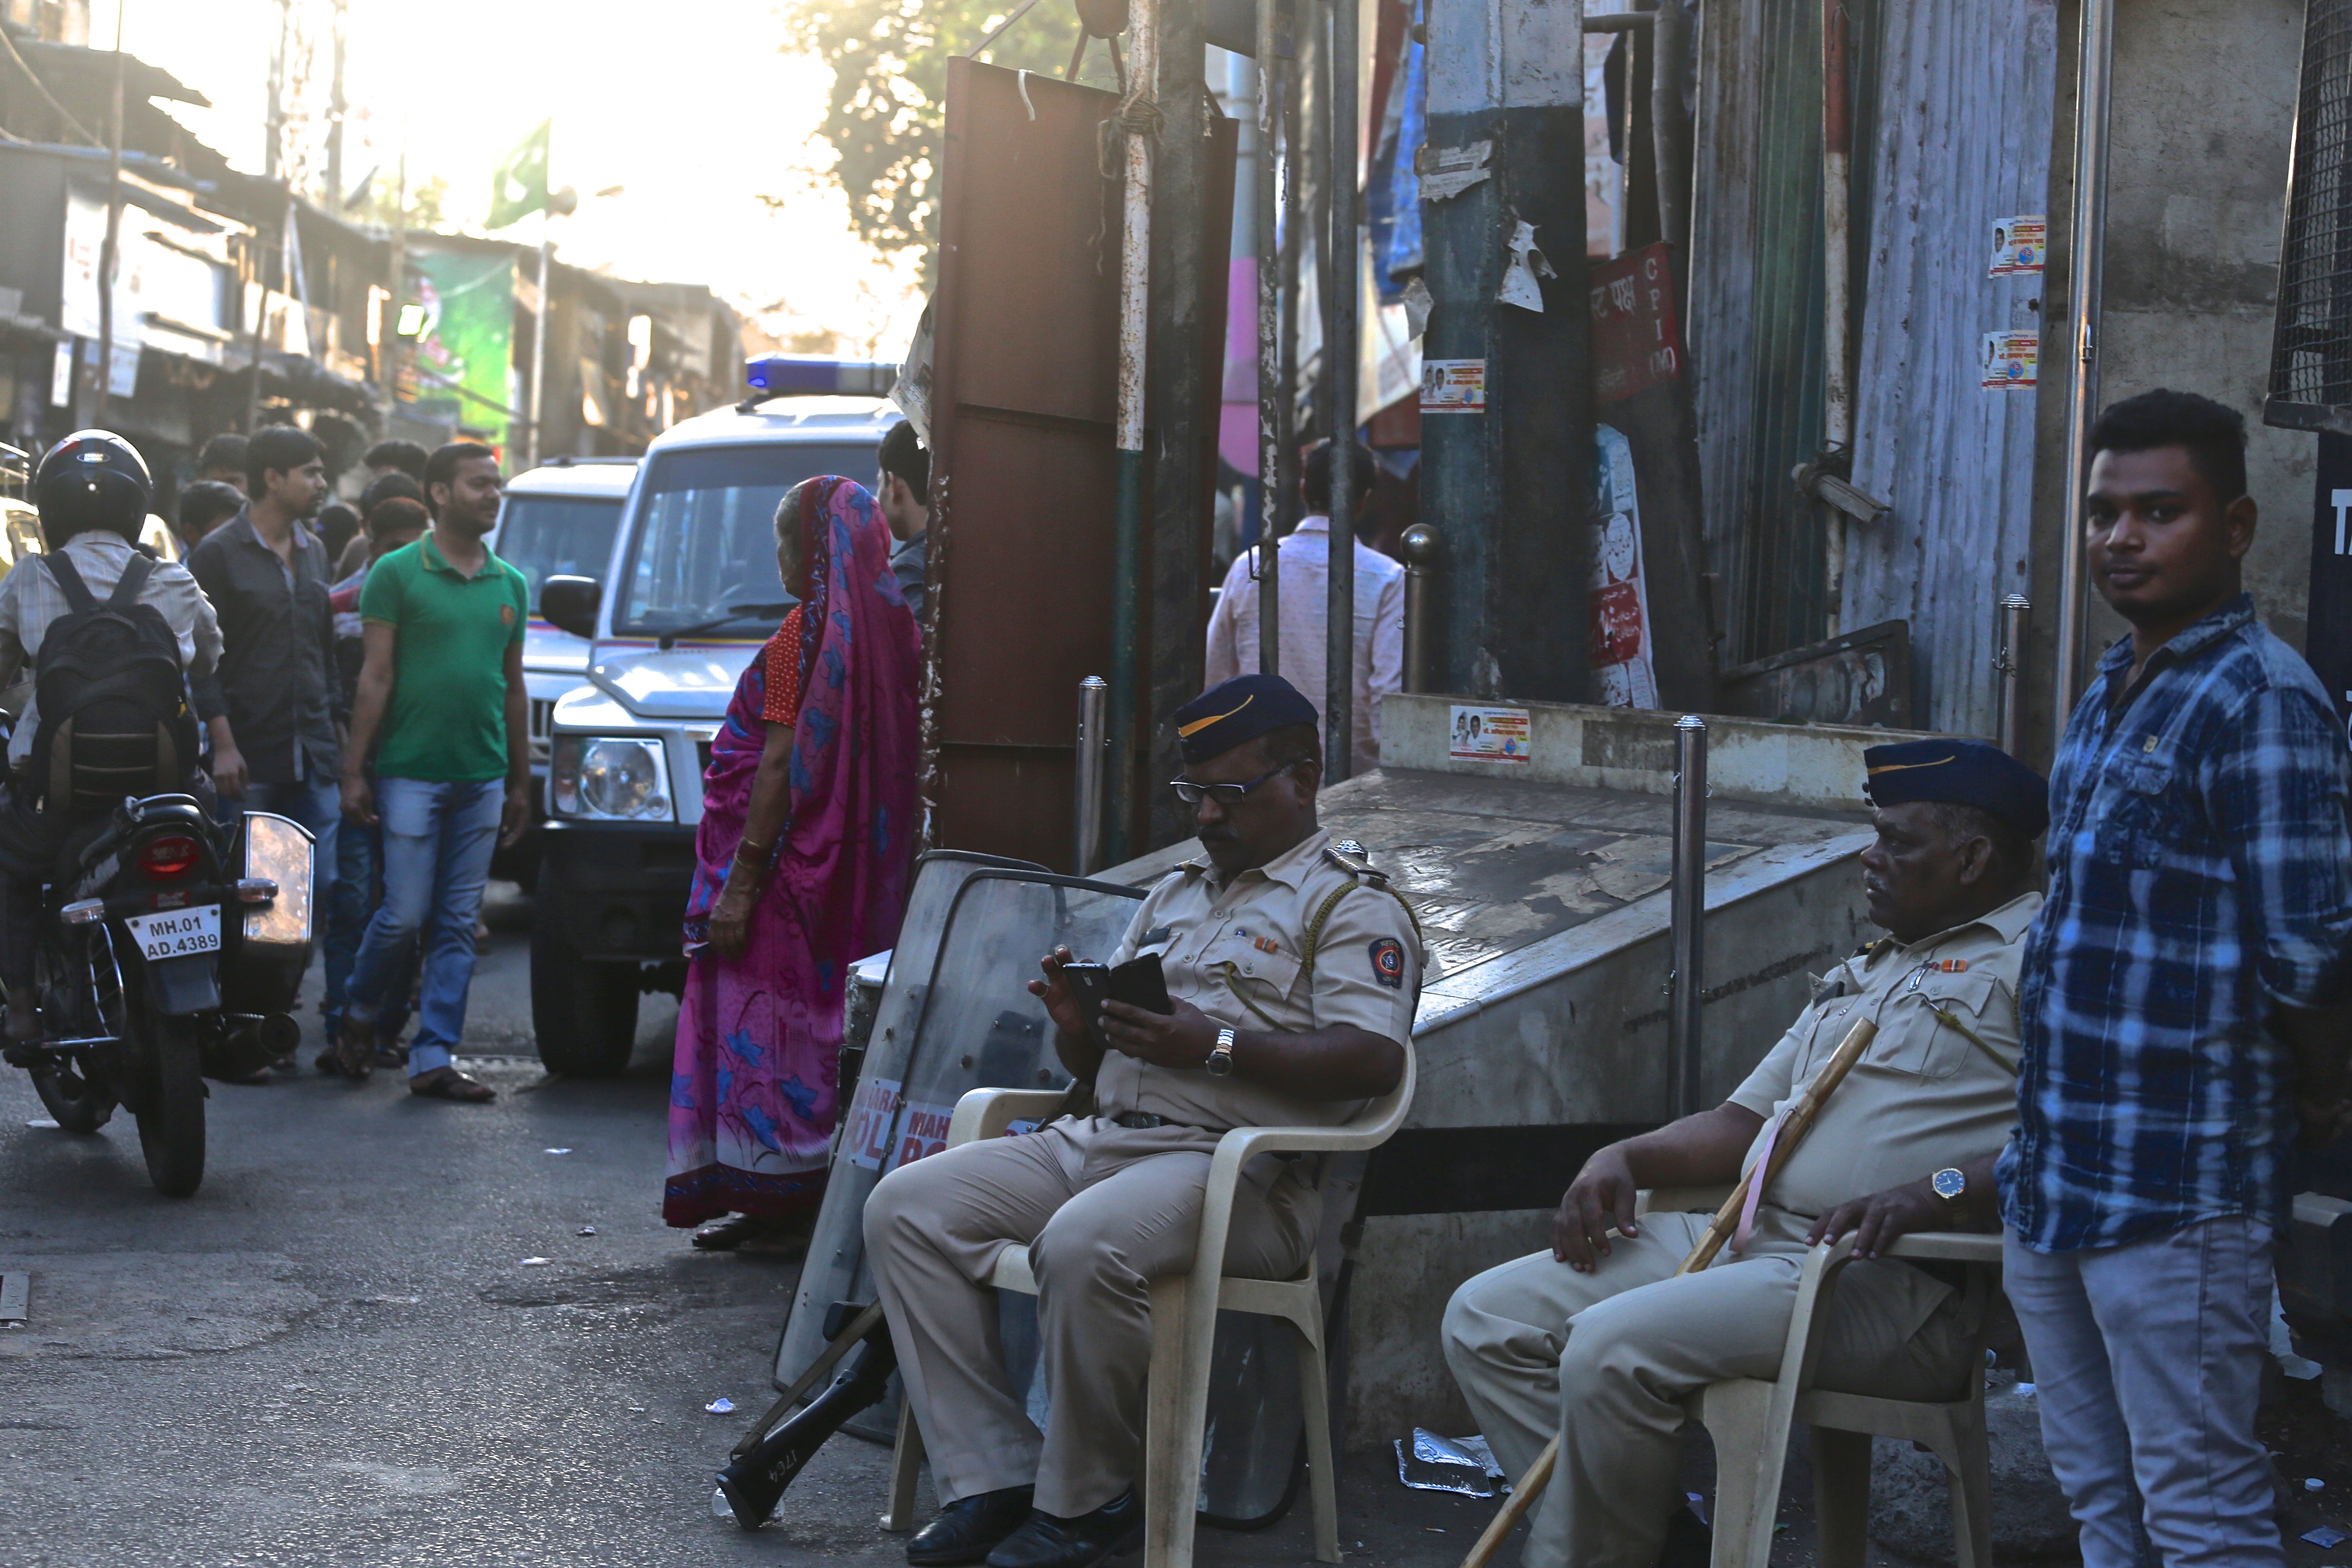 Indian police officers on guard near markets frequented by tourists. Image by Wes Bruer. India, 2017.